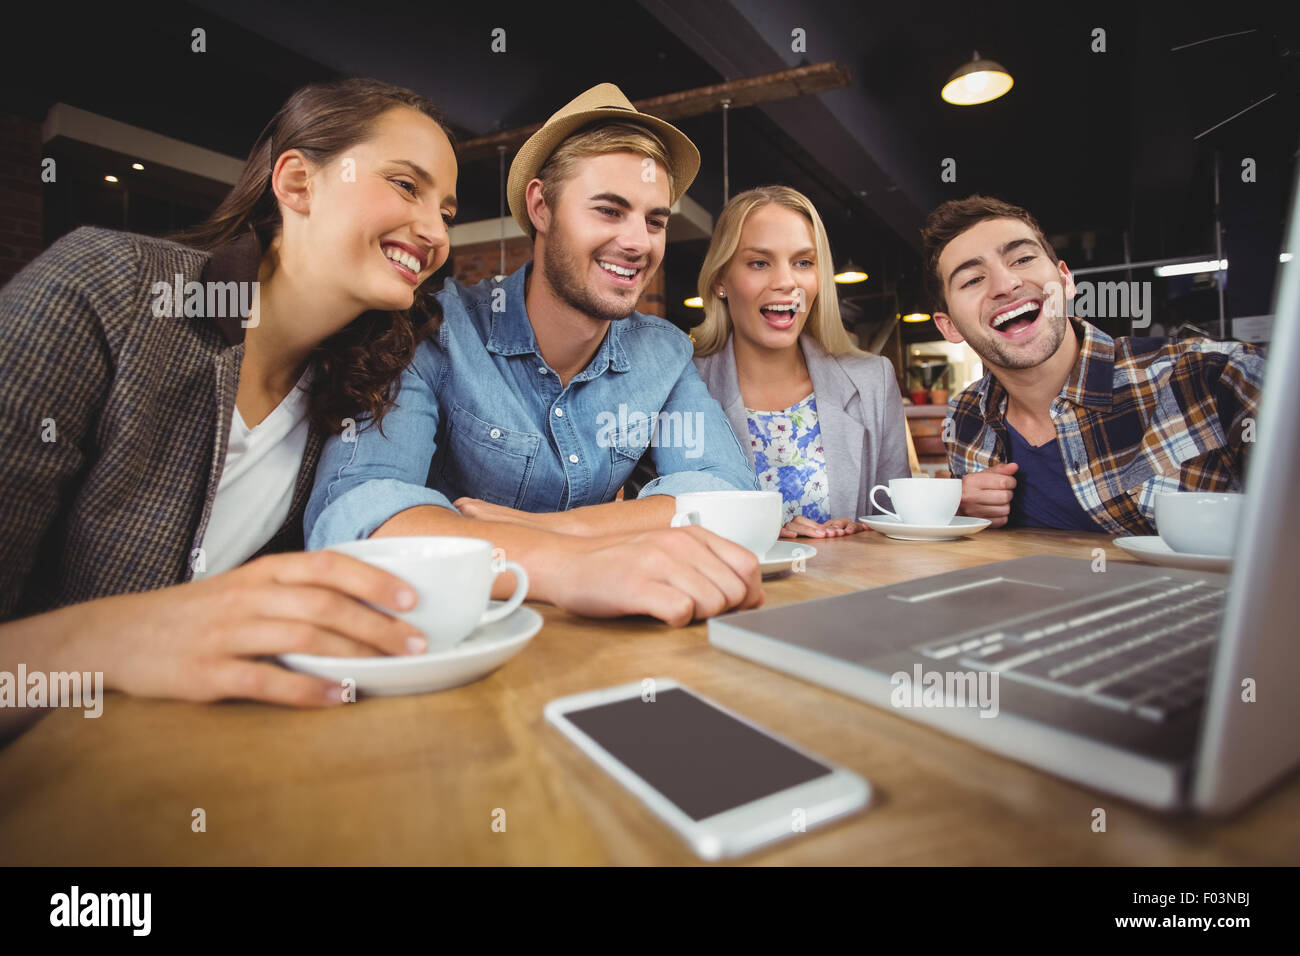 Laughing friends looking at laptop screen Stock Photo